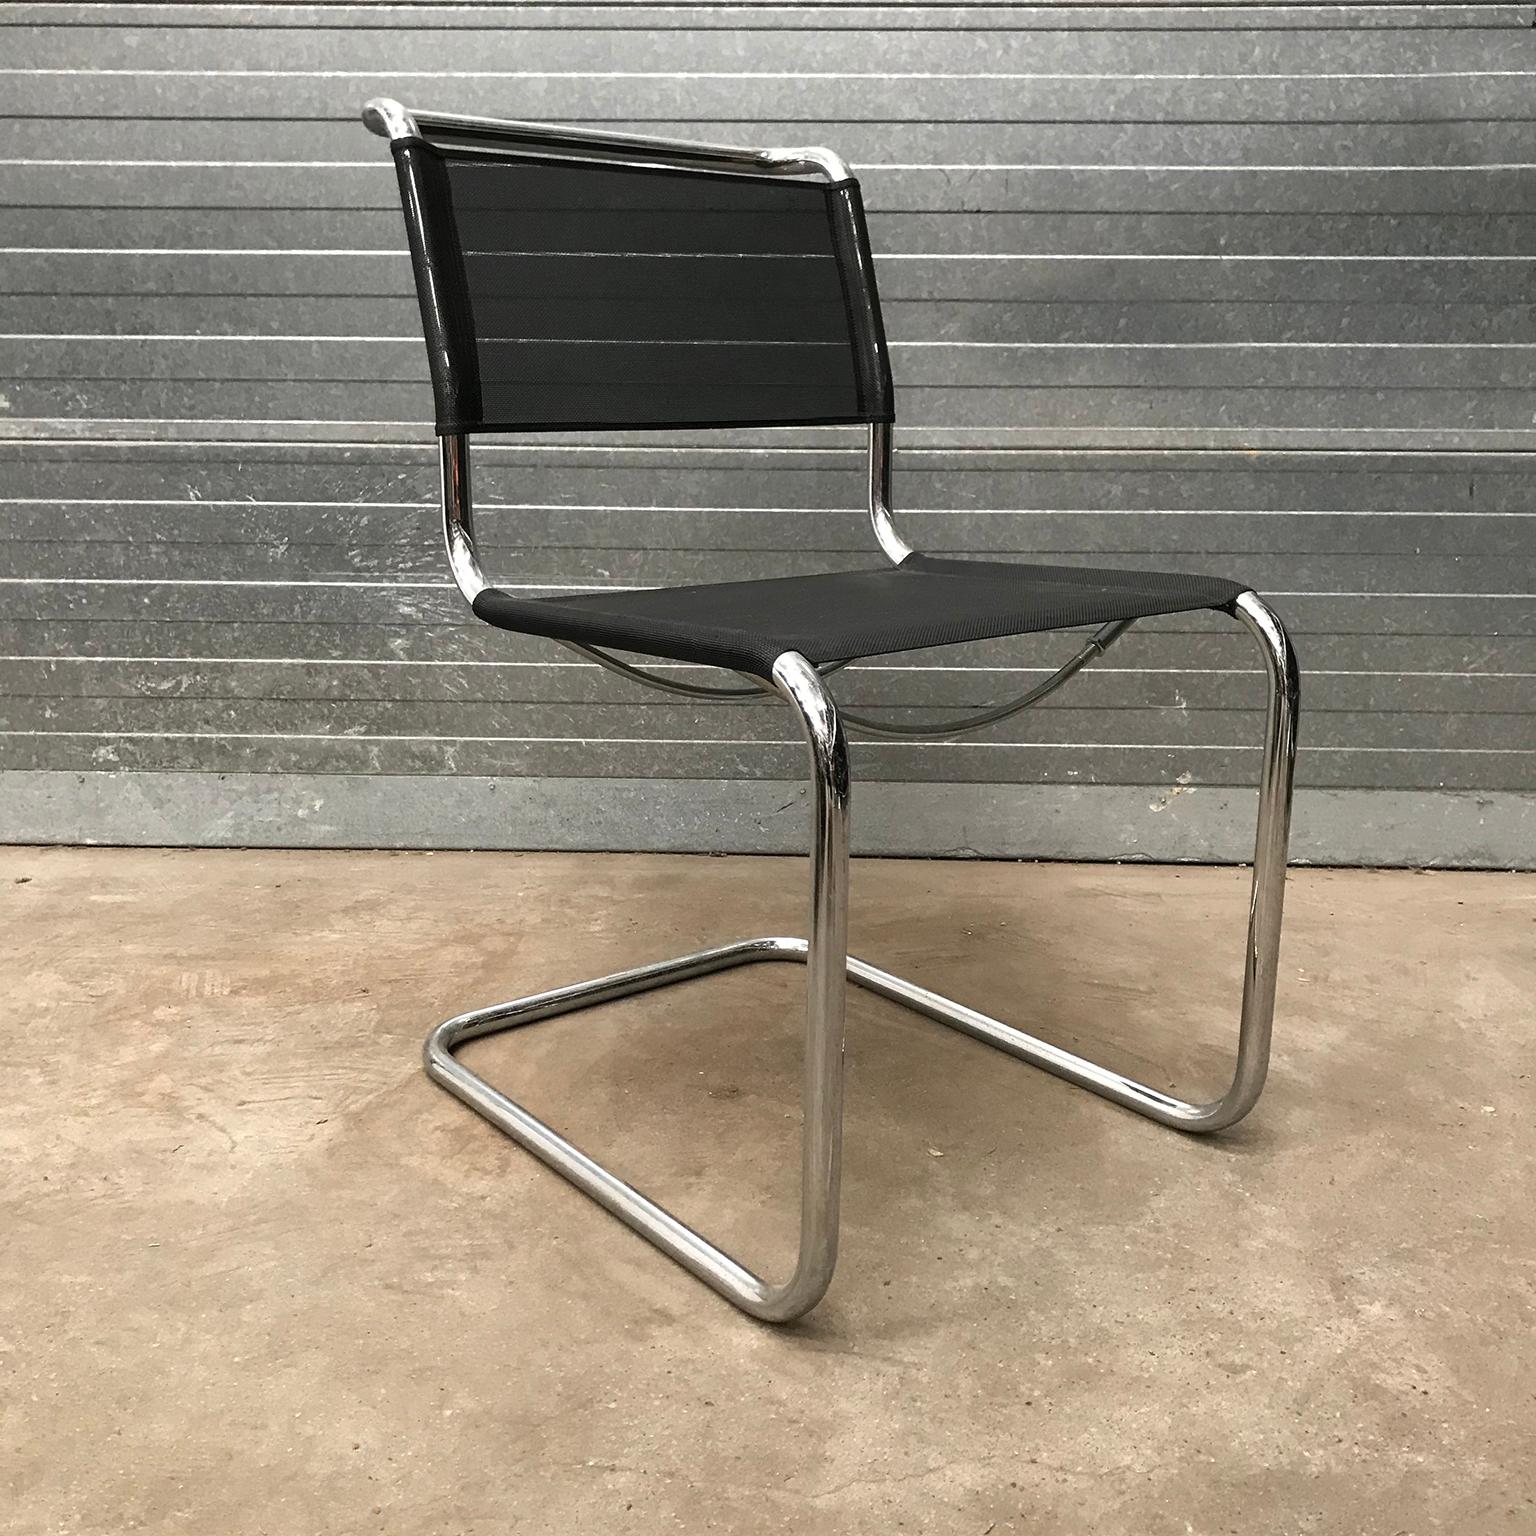 Please ask KC Godrie Ibiza/Amsterdam for our competitive personal shipping quotes.

Beautiful Thonet chair S33 with net weave upholstery in black. Timeless and elegant design. The chair is in good condition except for some tiny (rusty) spots on the